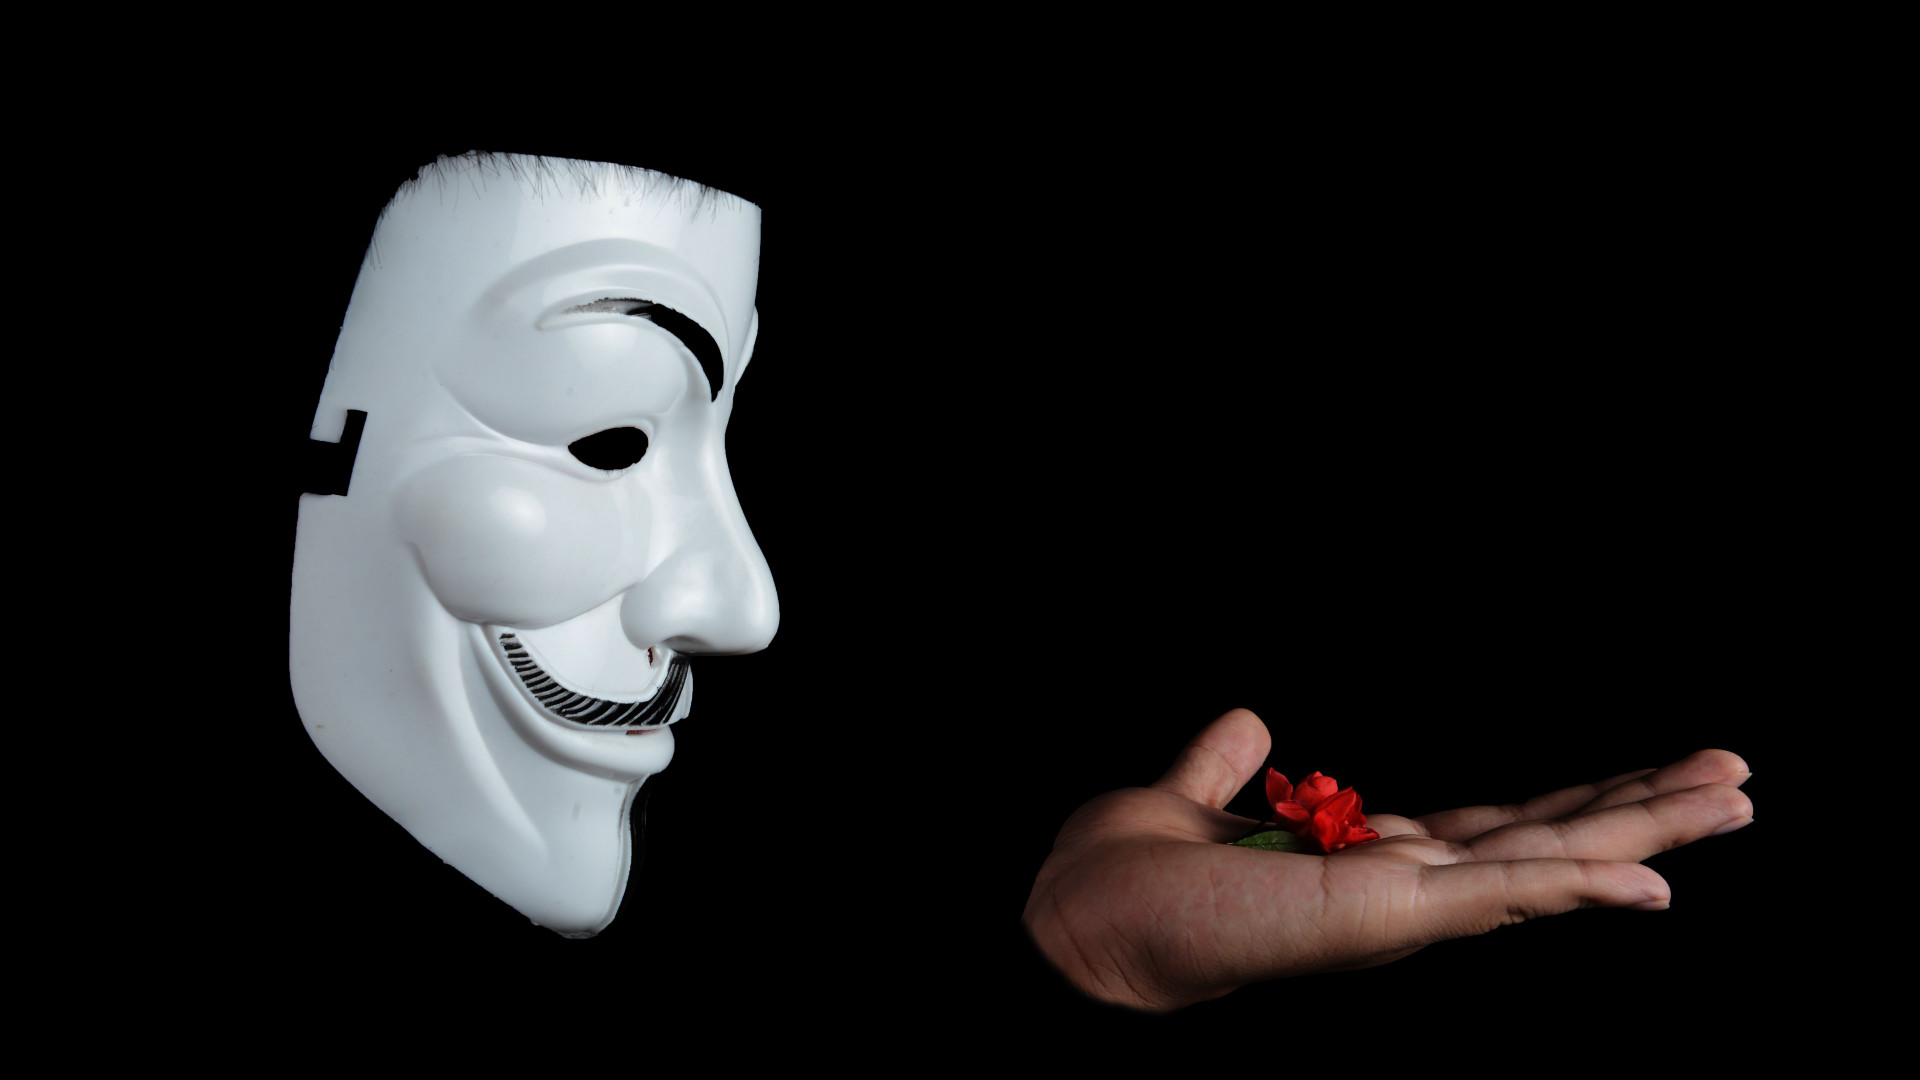 Anonymous Mask 1920X1080 Wallpapers